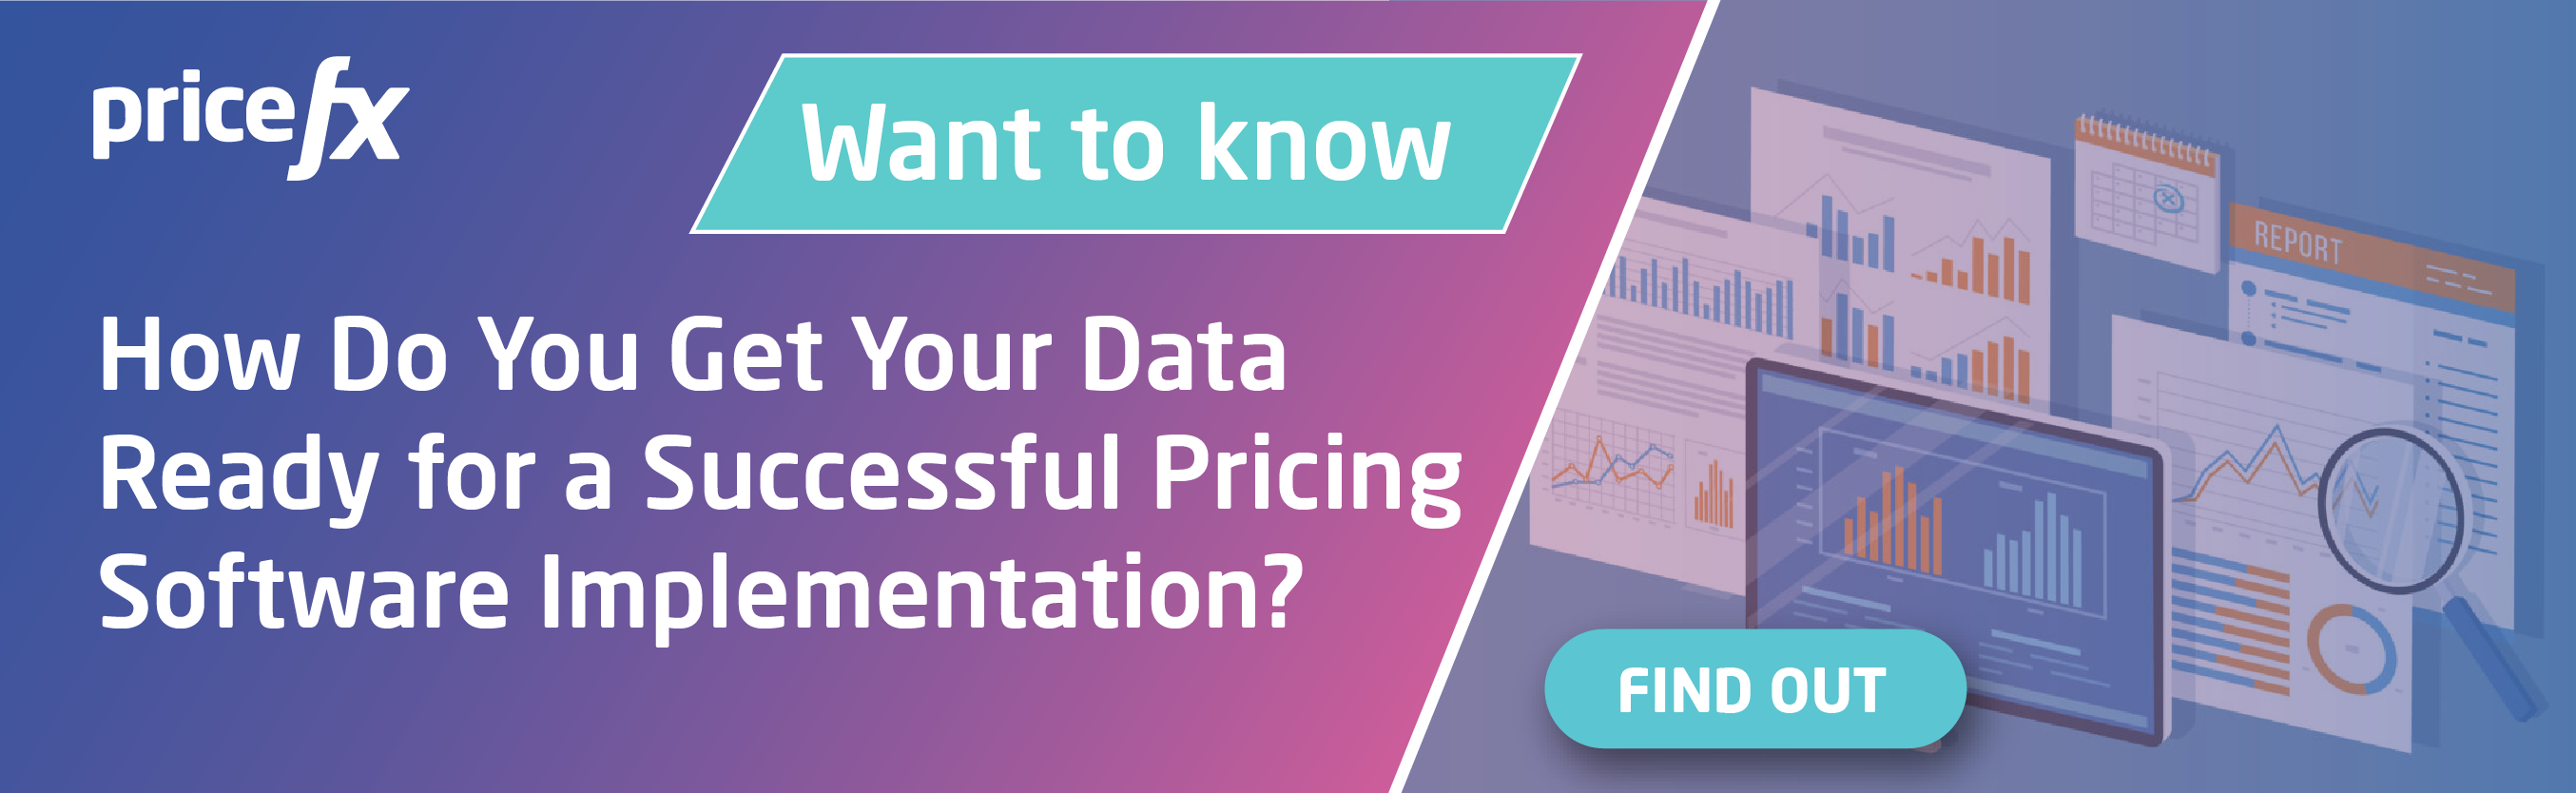 v01_CTA_The 3 Data Sets You Need for Pricing Software Implementation